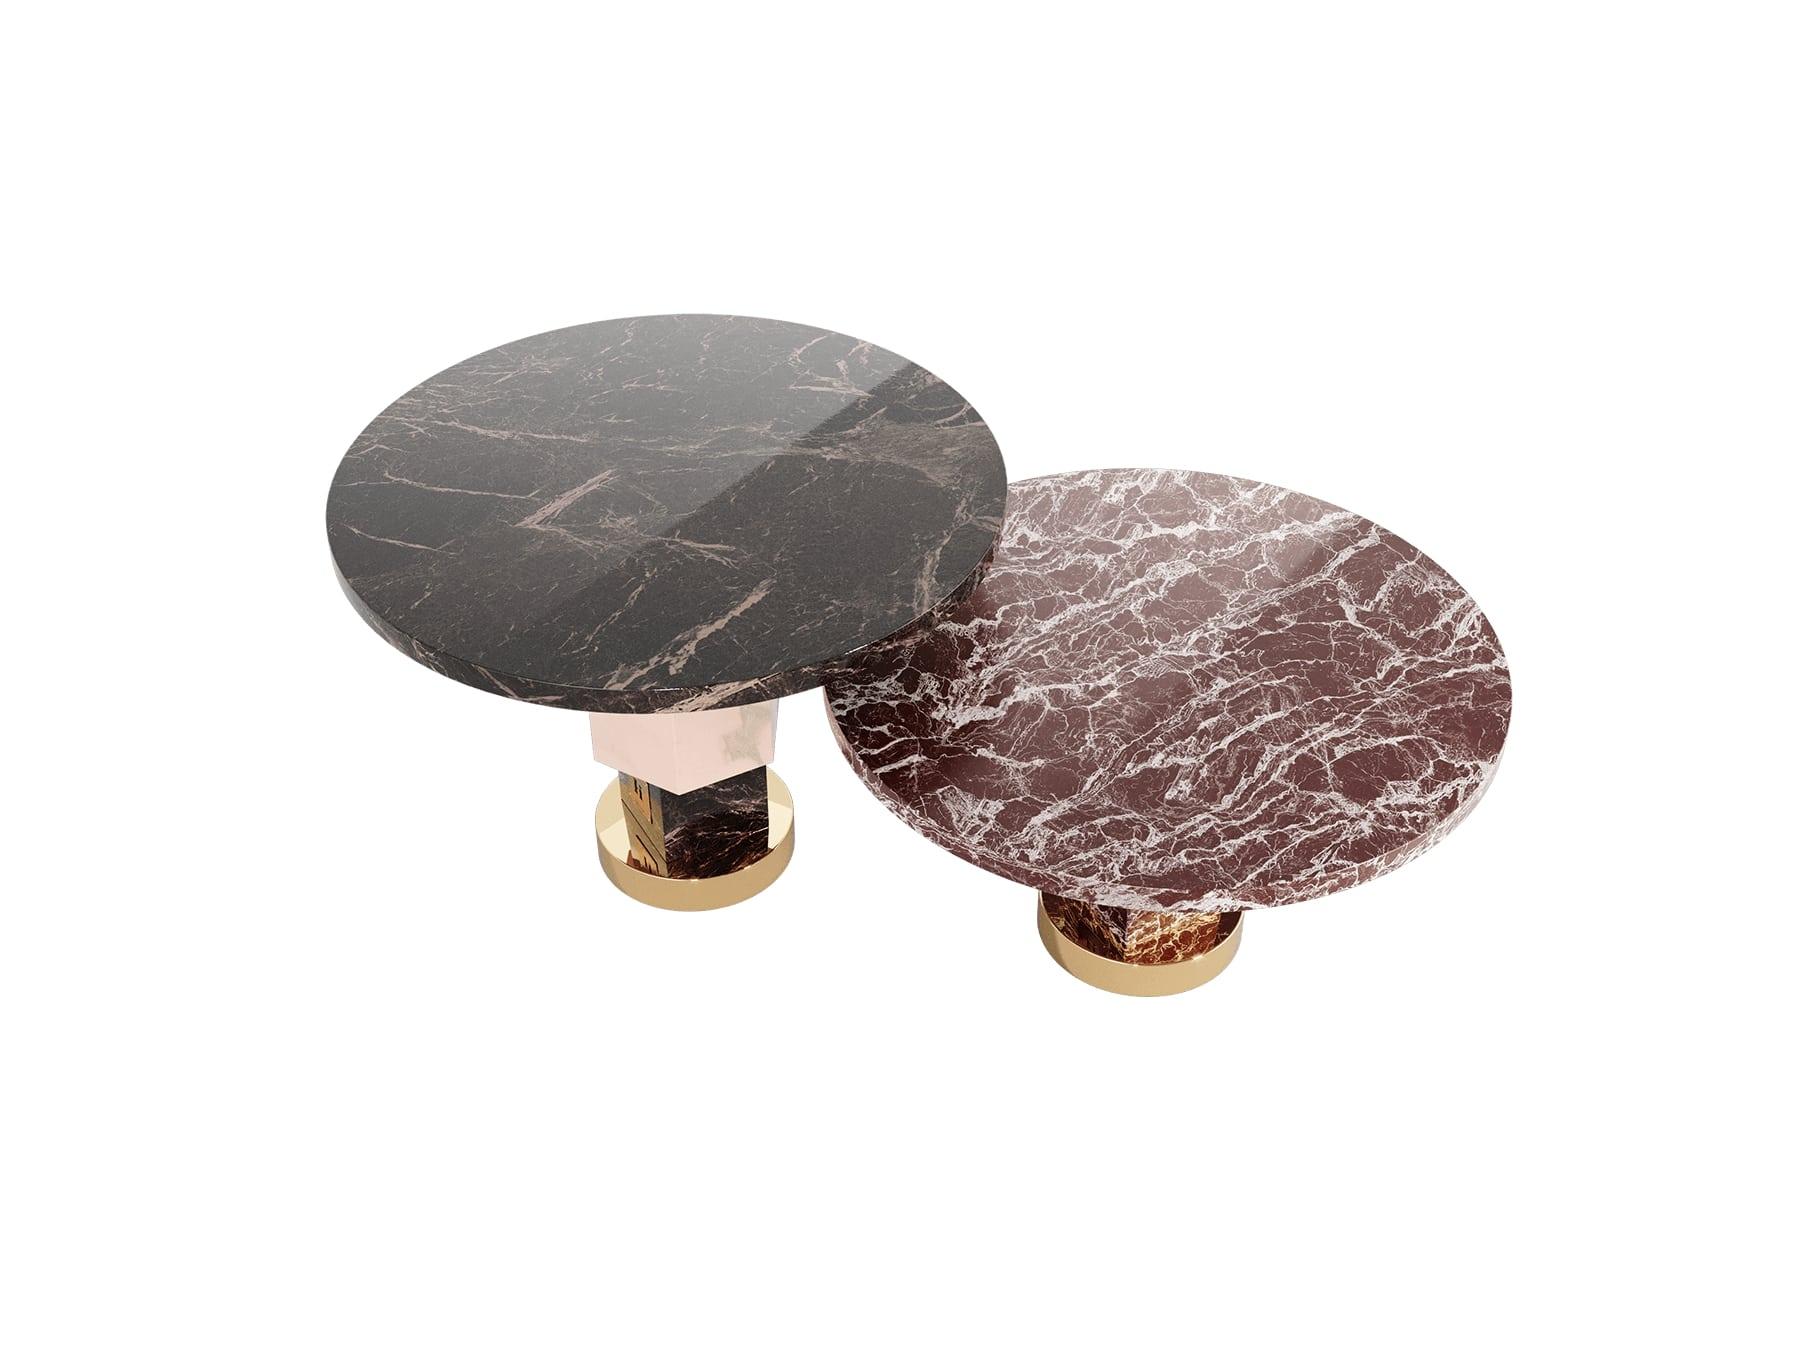 Limited Edition: The Niagara Center Table features a geometric shape inspired by the Memphis movement vibe. A modern coffee table set made of a curated selection of different marbles. This design set is the perfect choice for a luxury living